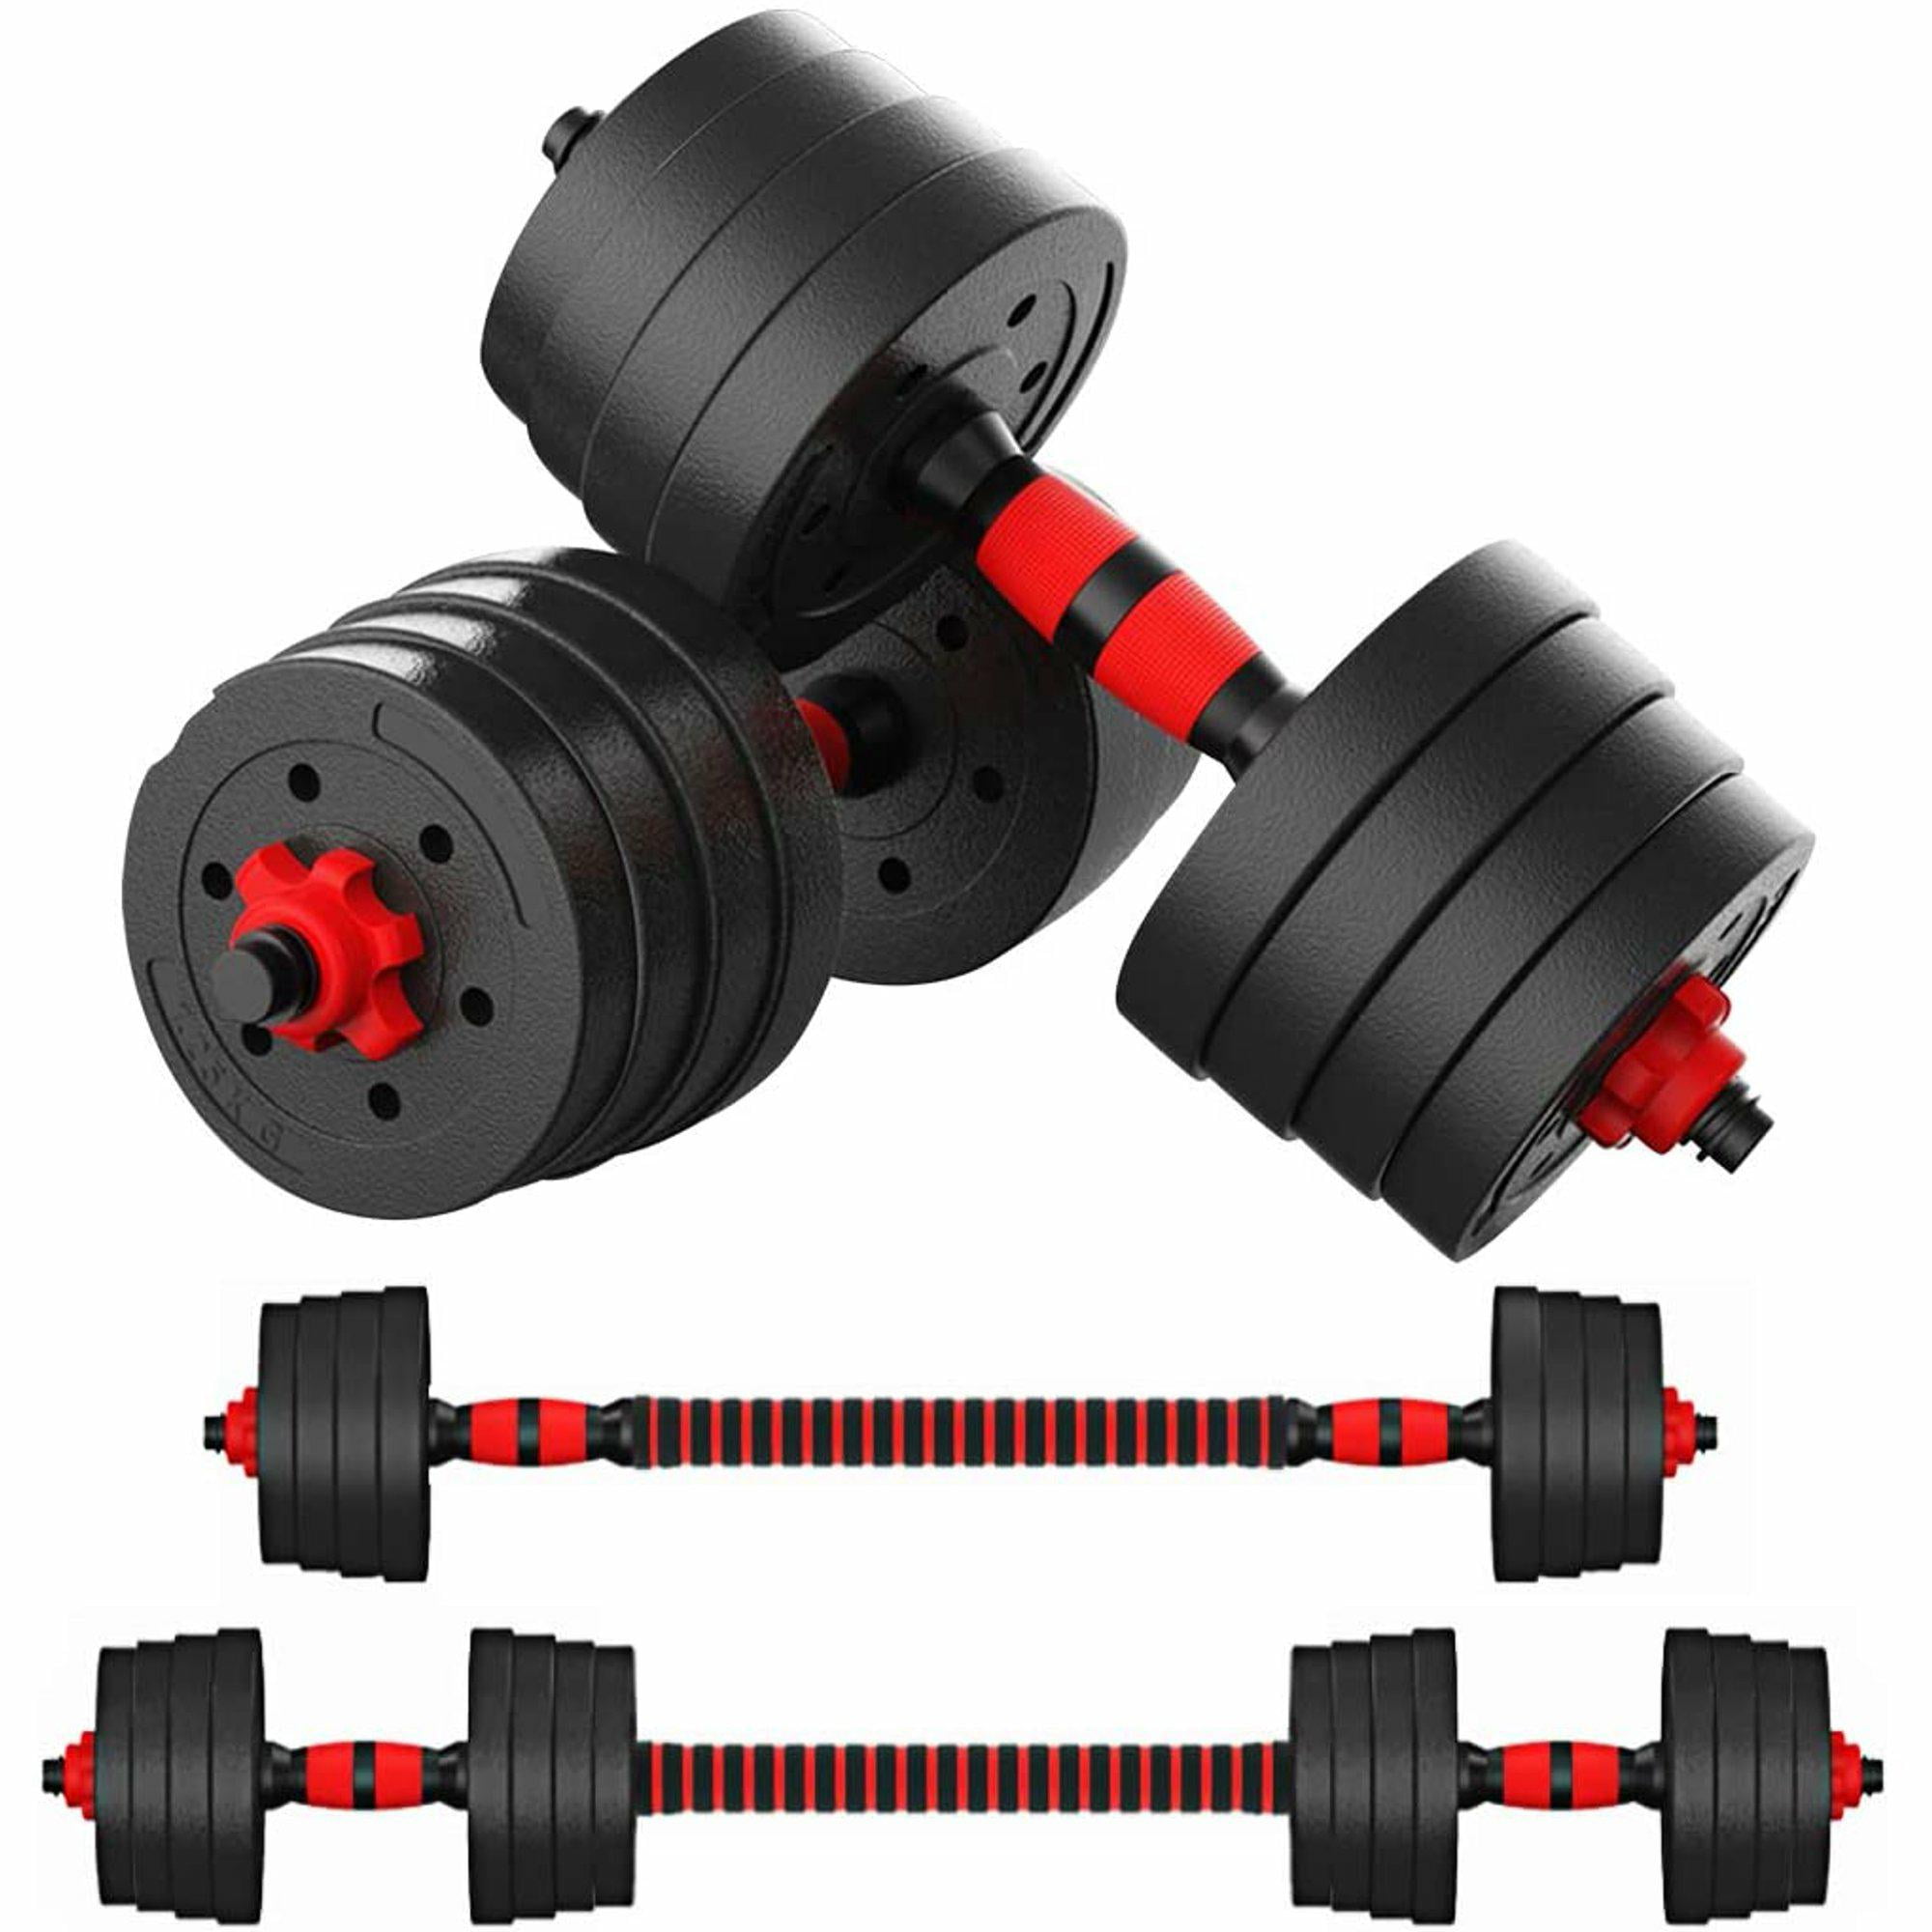 ZYOMY Dumbbells Barbell Men Women 44Lbs Free Weight Dumbbell Set with Connecting Rod can be Used as Barbell for Home Fitness Exercise Training Workout Adjustable Dumbbell Set 